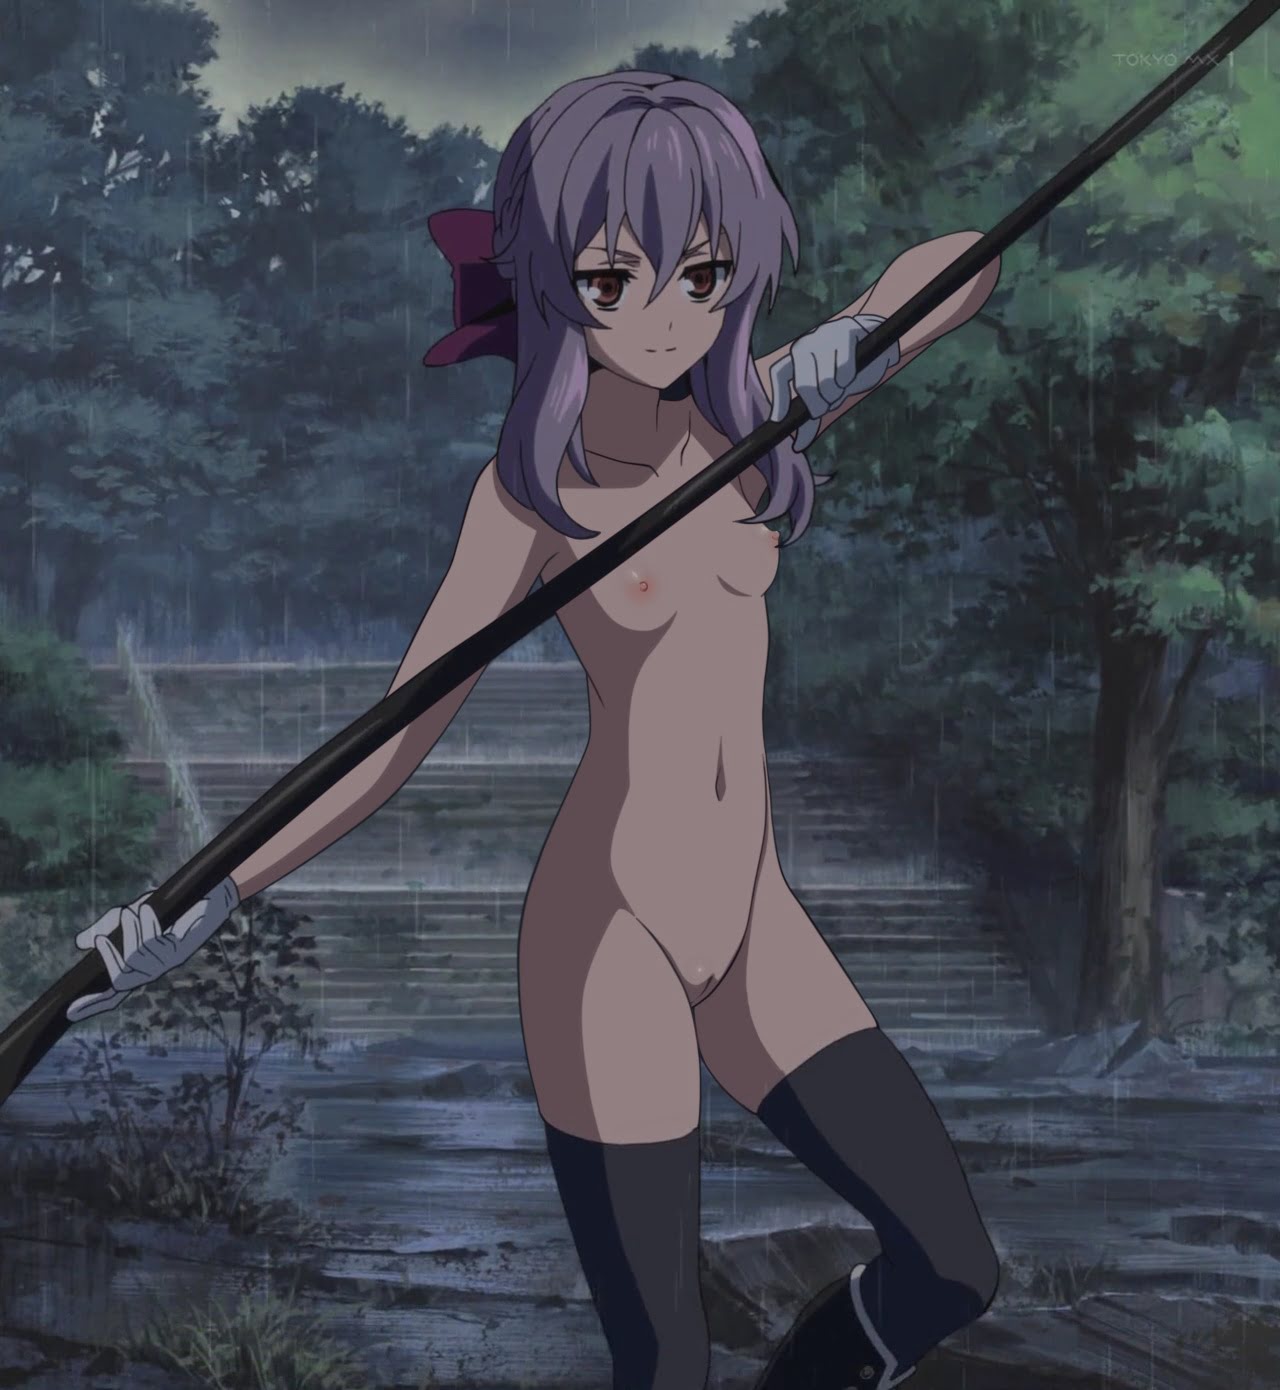 Seraph of the end nudes